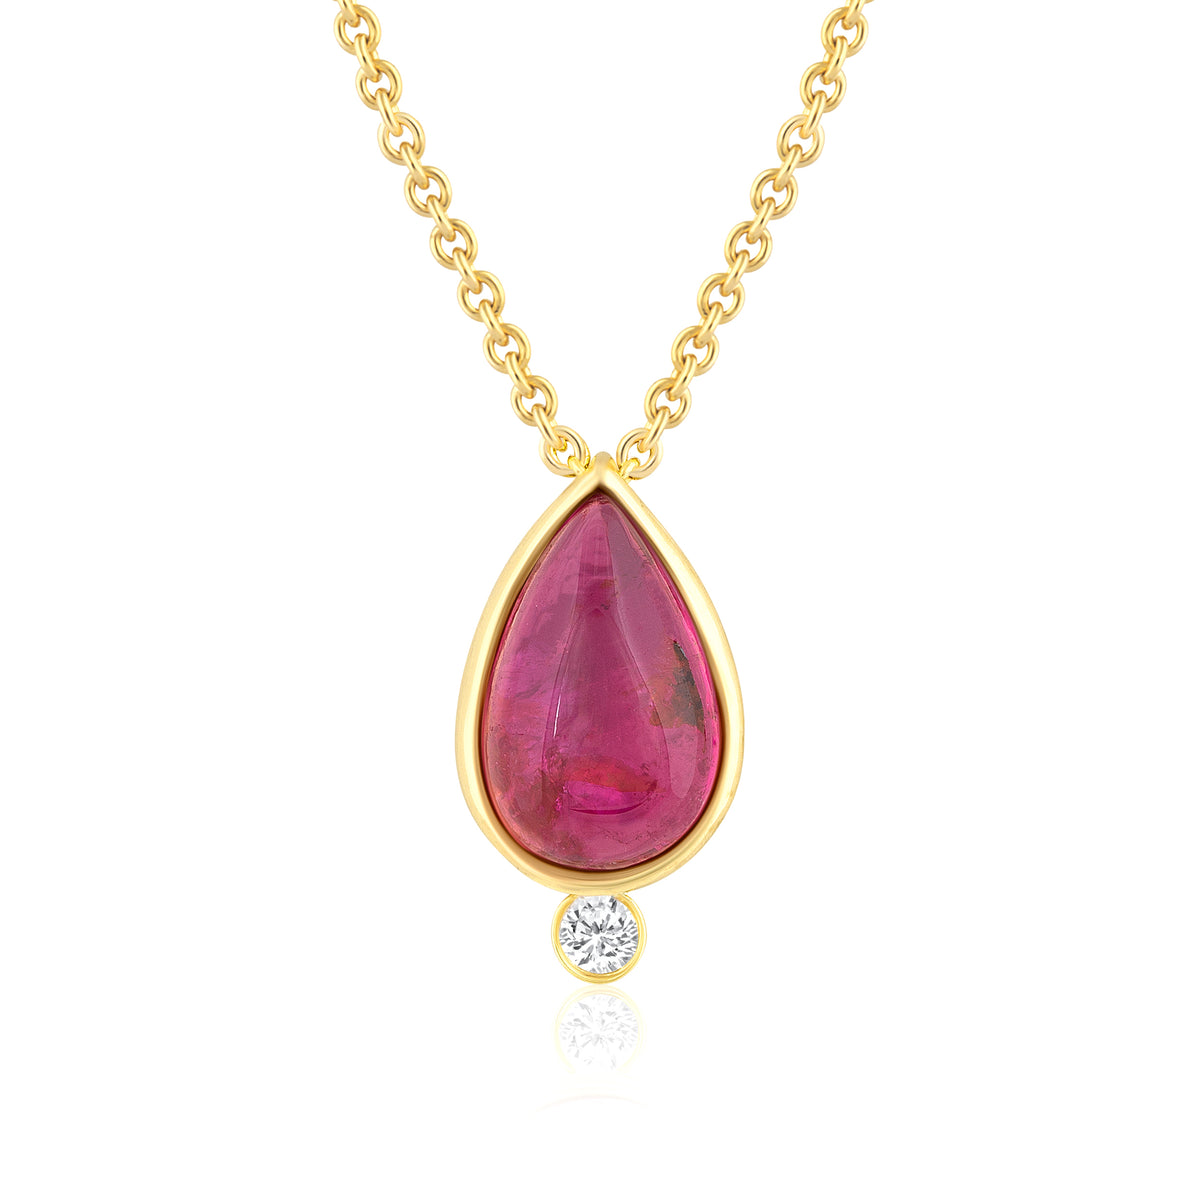 RUBELLITE (PINK) TOURMALINE SACRED SEED NECKLACE